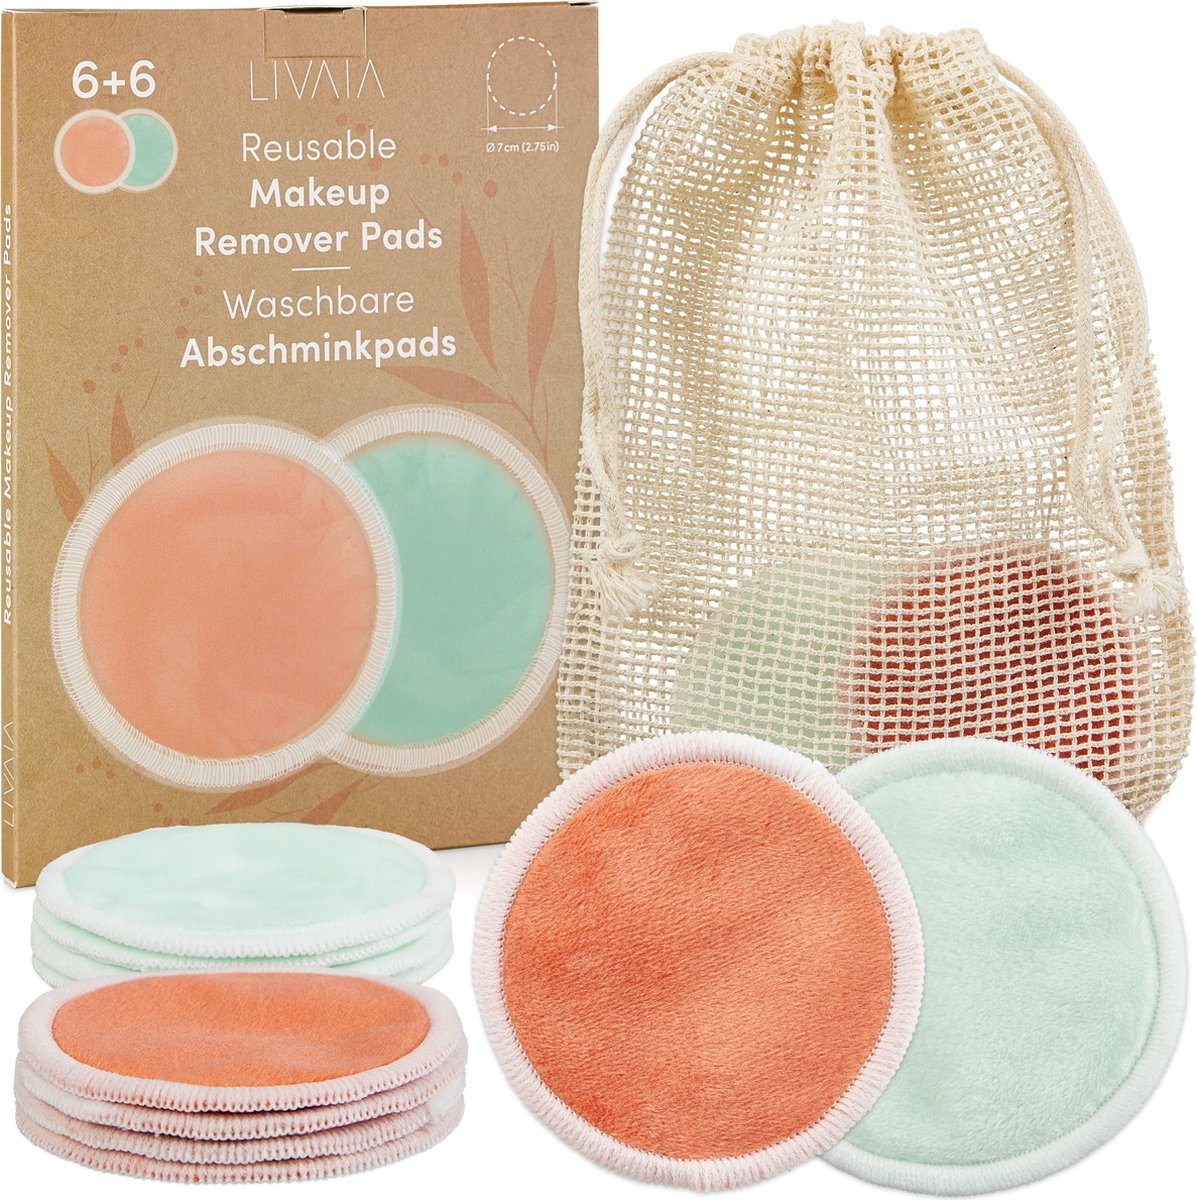 Livaia© Wasbare Make-up Remover Pads : 12 wasbare Make-up Remover Pads met Waszakje - Wasbare Katoenen Pads Herbruikbaar - Herbruikbare Katoenen Pads - 12x Wasbare Make-up Remover Pads